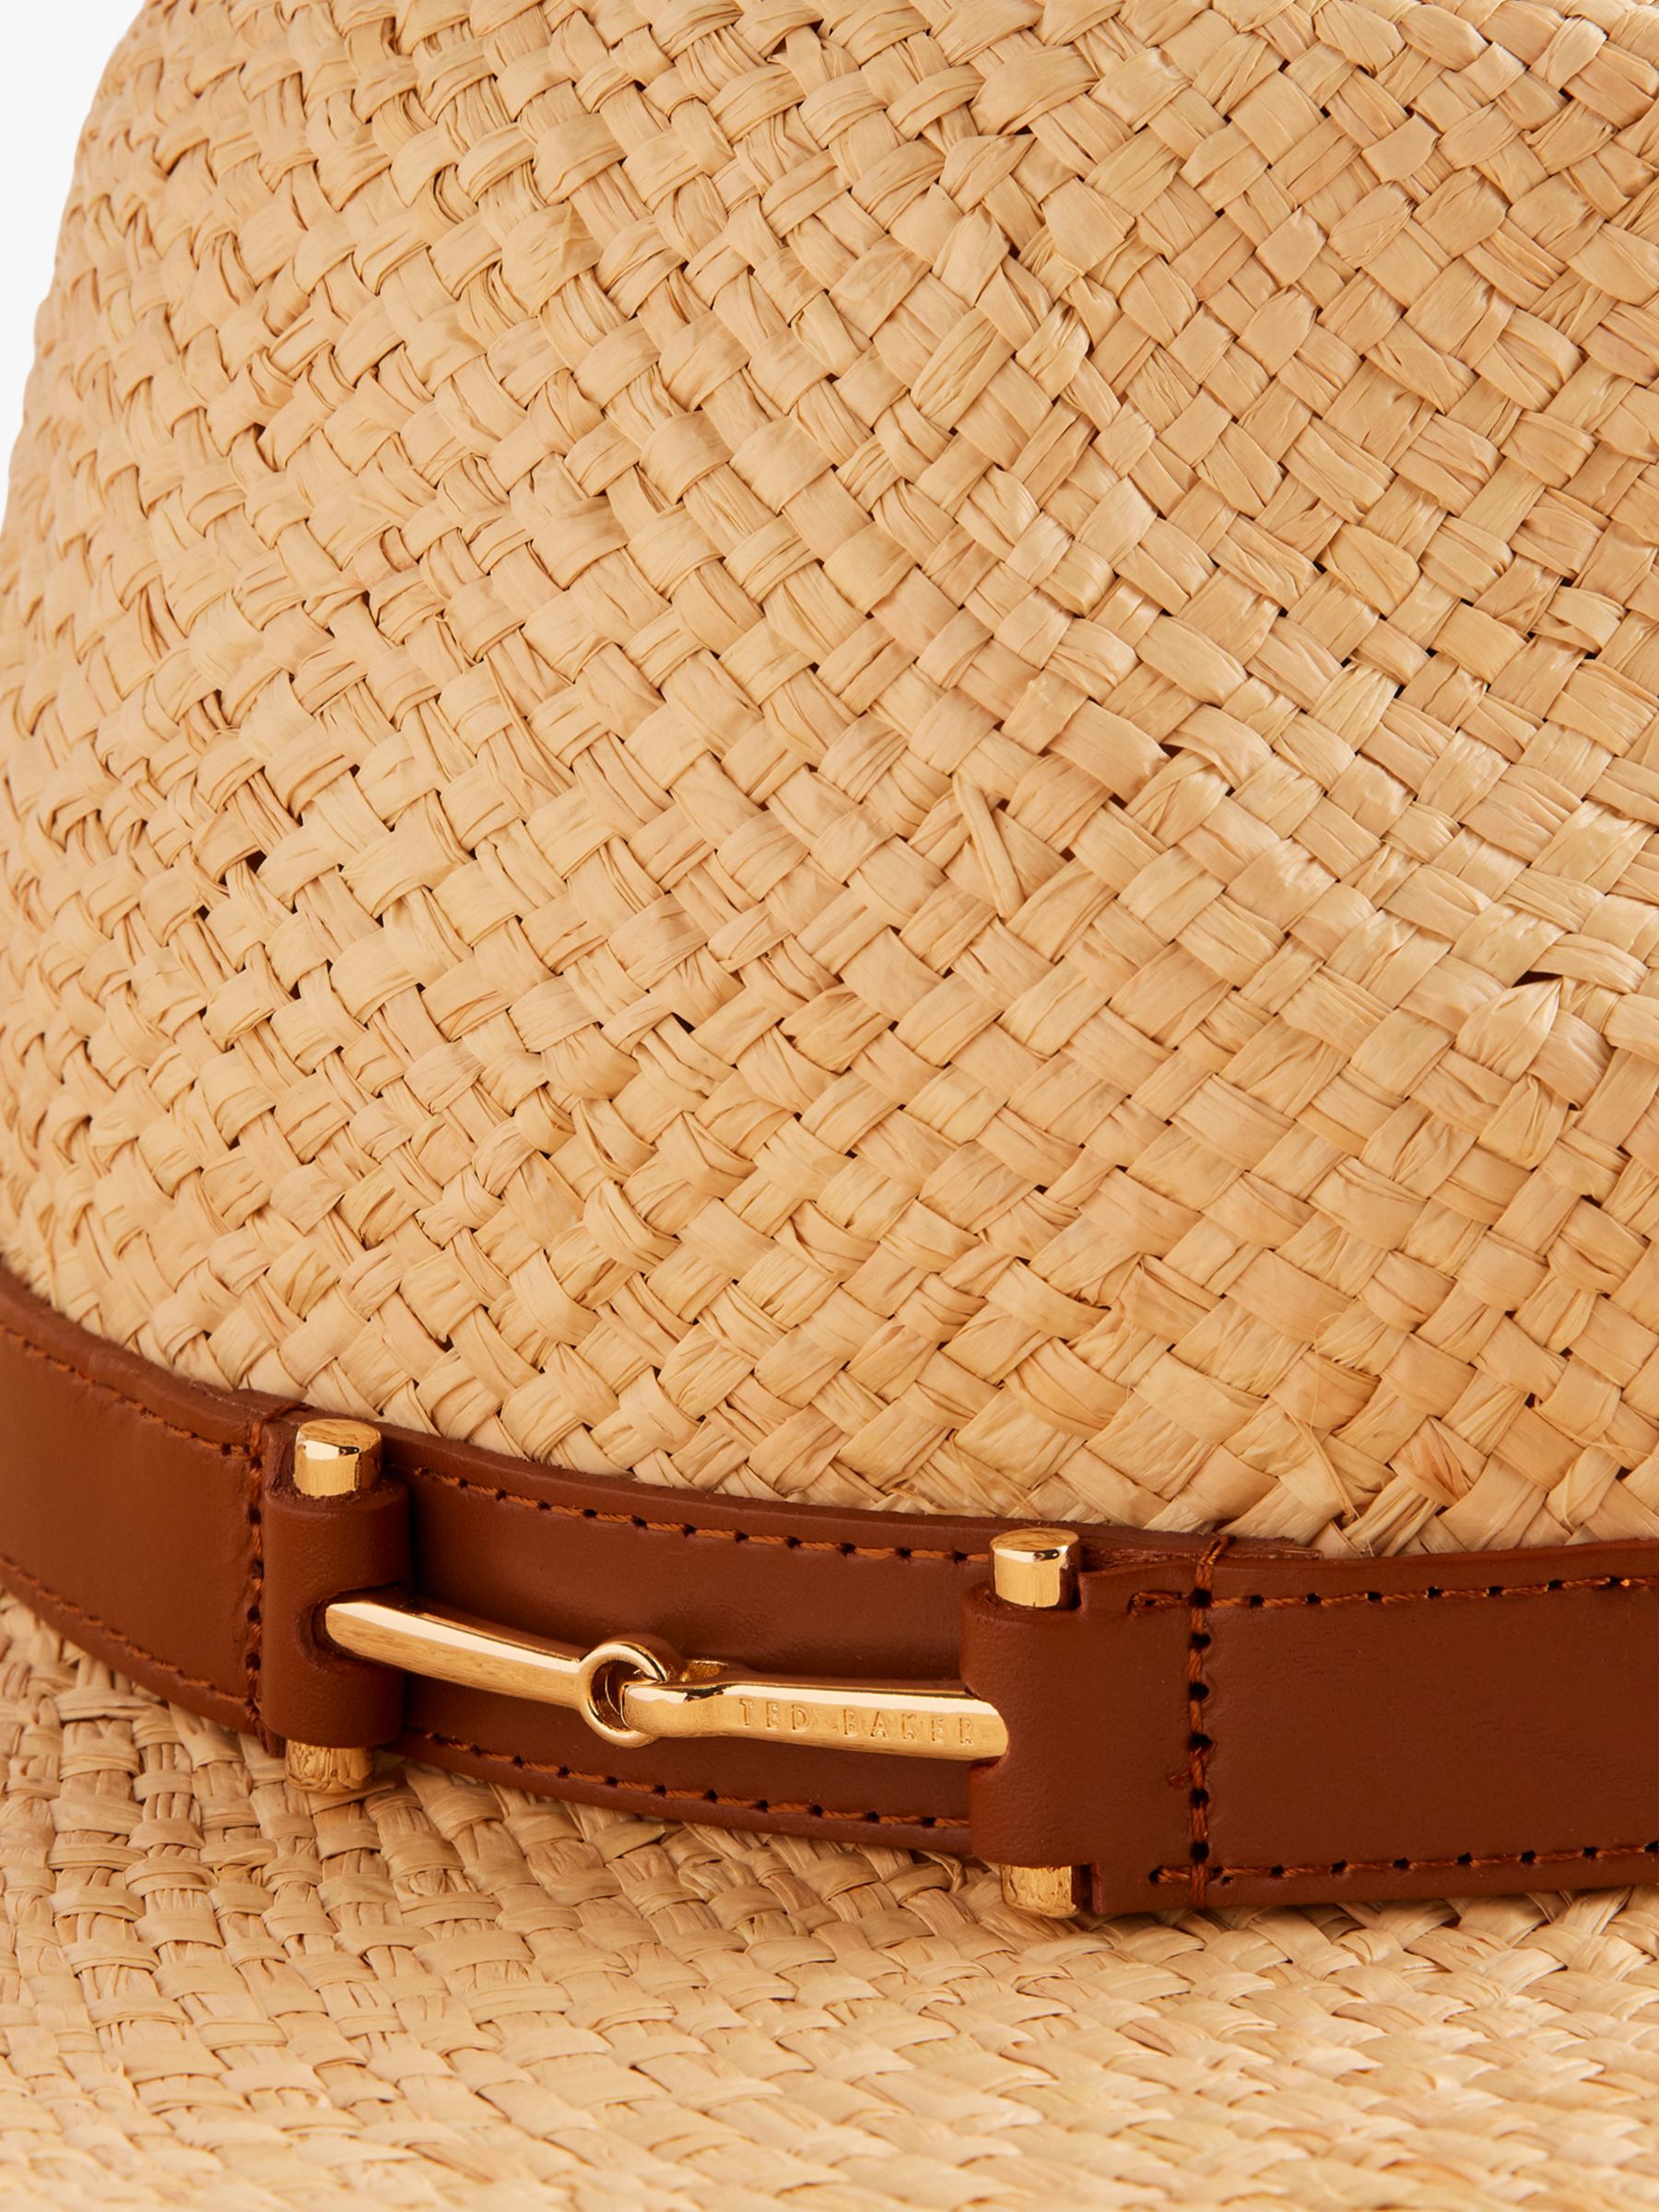 Ted Baker Hariets Straw Hat, Natural, One Size